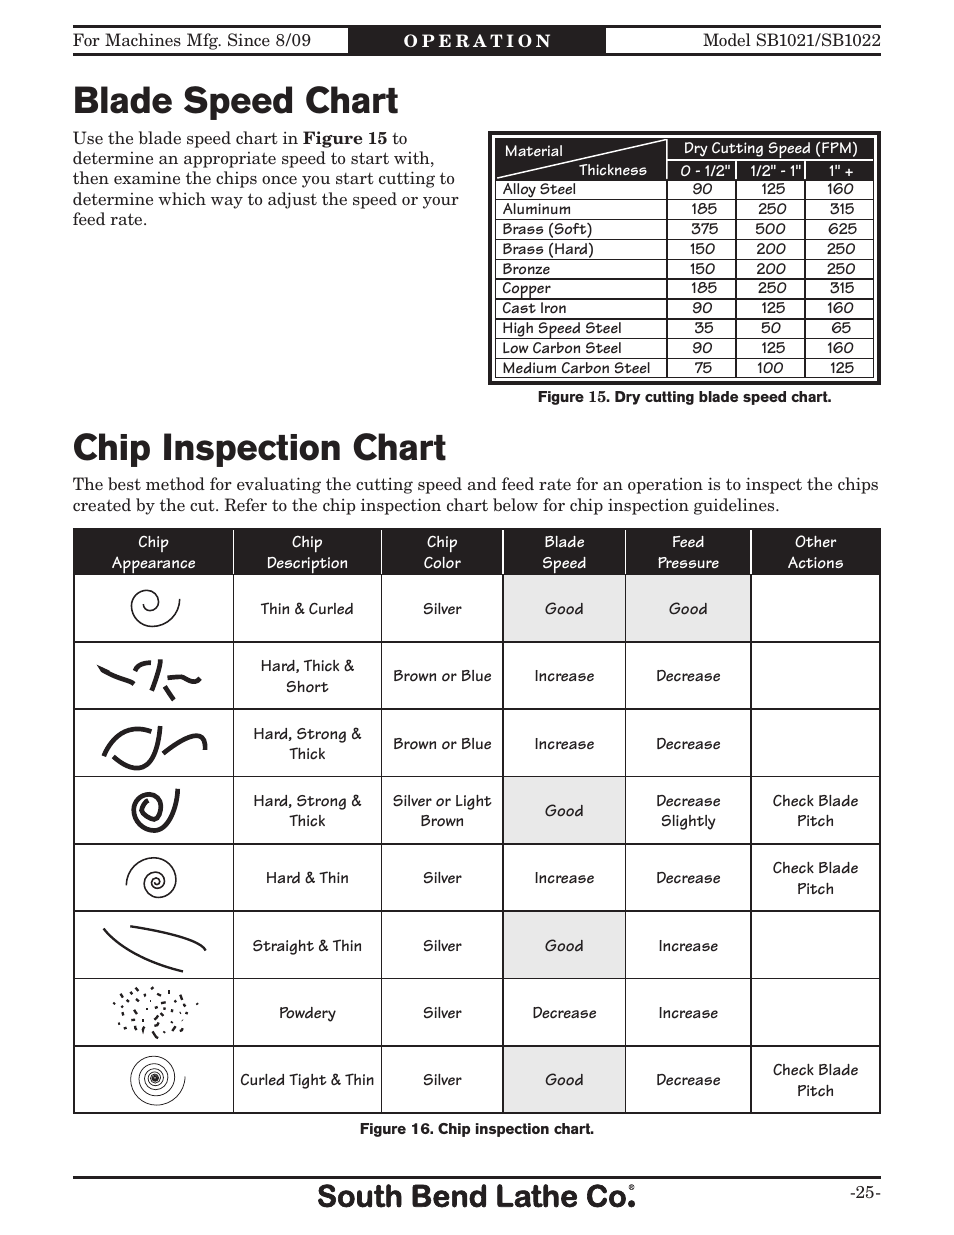 Material Cutting Speed Chart